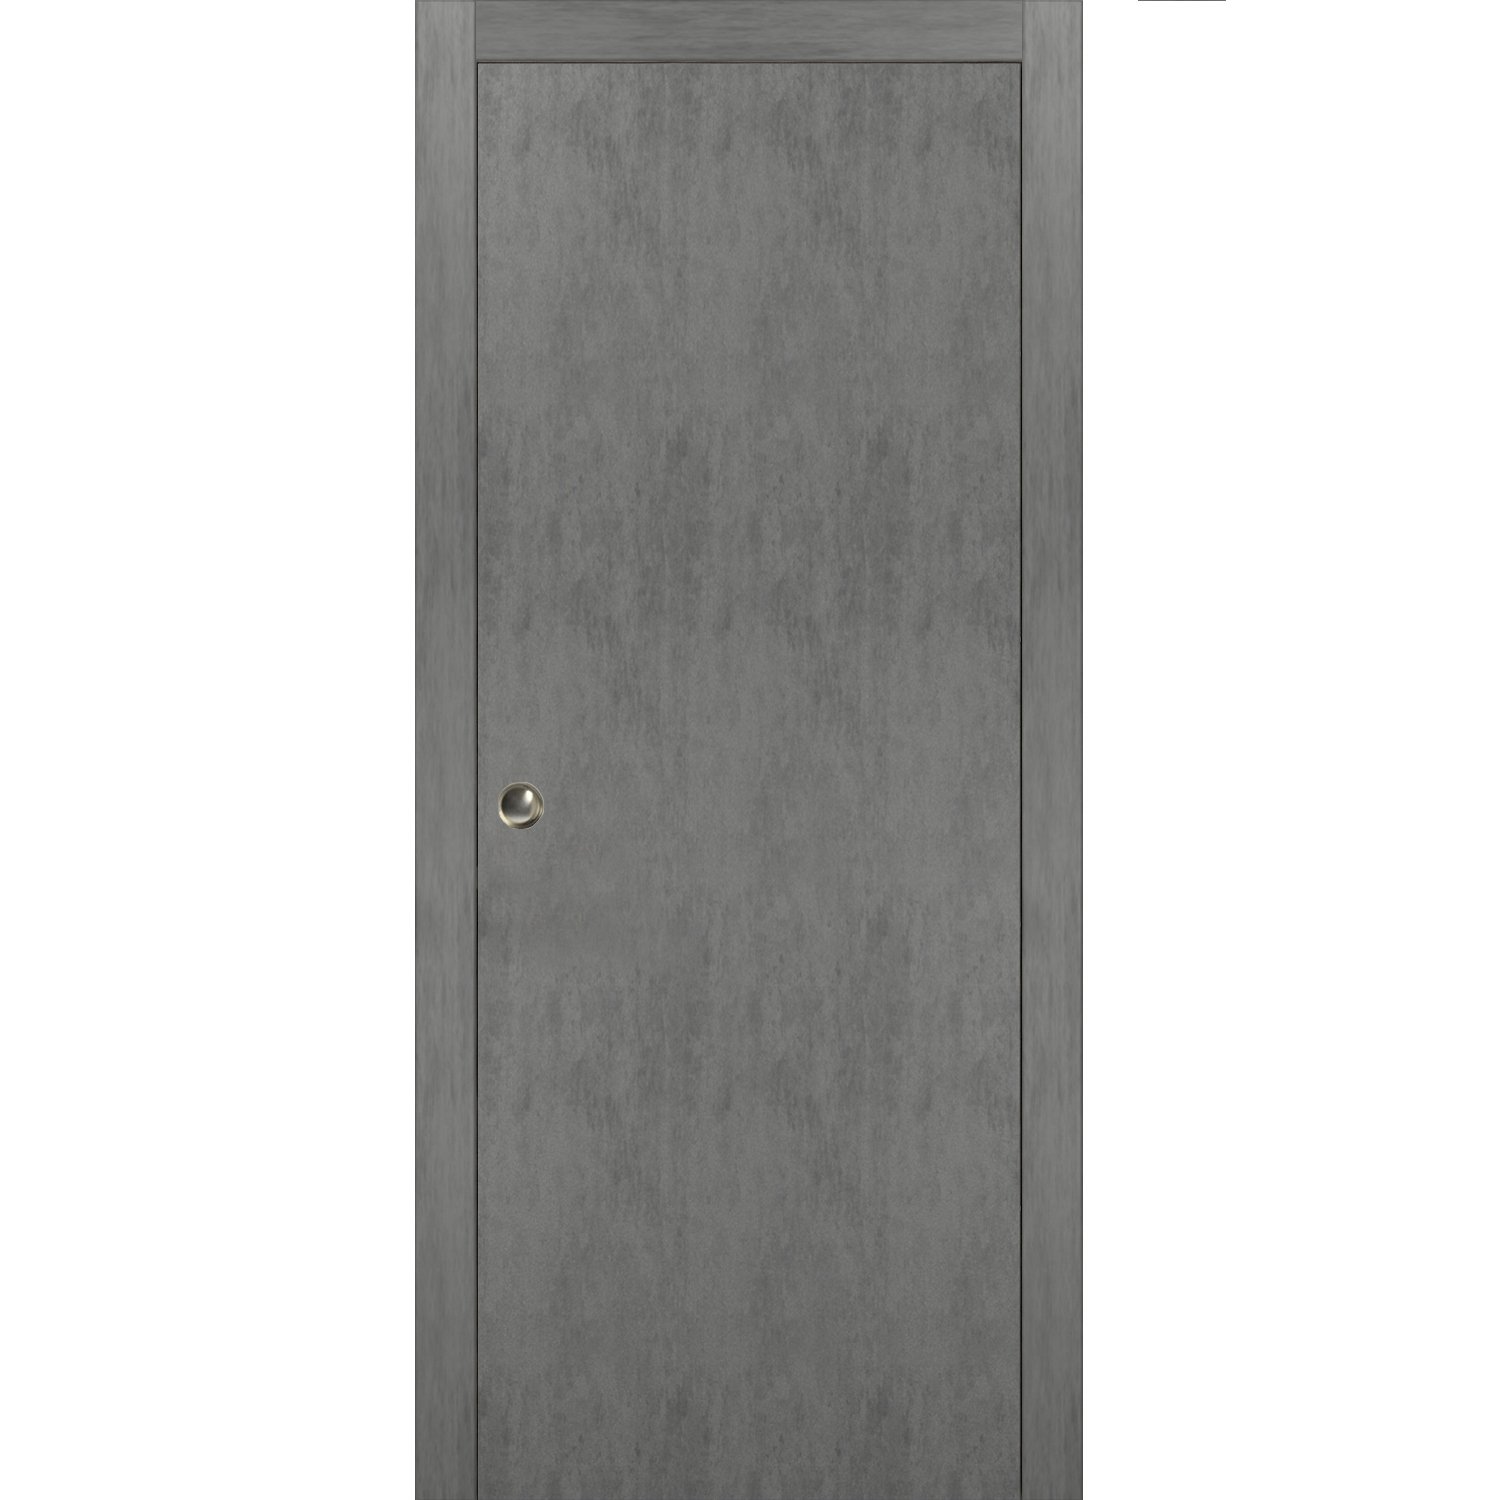 Sliding French Pocket Door 24 x 80 inches with | Planum 0010 Concrete | Kit Trims Rail Hardware | Solid Wood Interior Bedroom Sturdy Doors - image 1 of 3